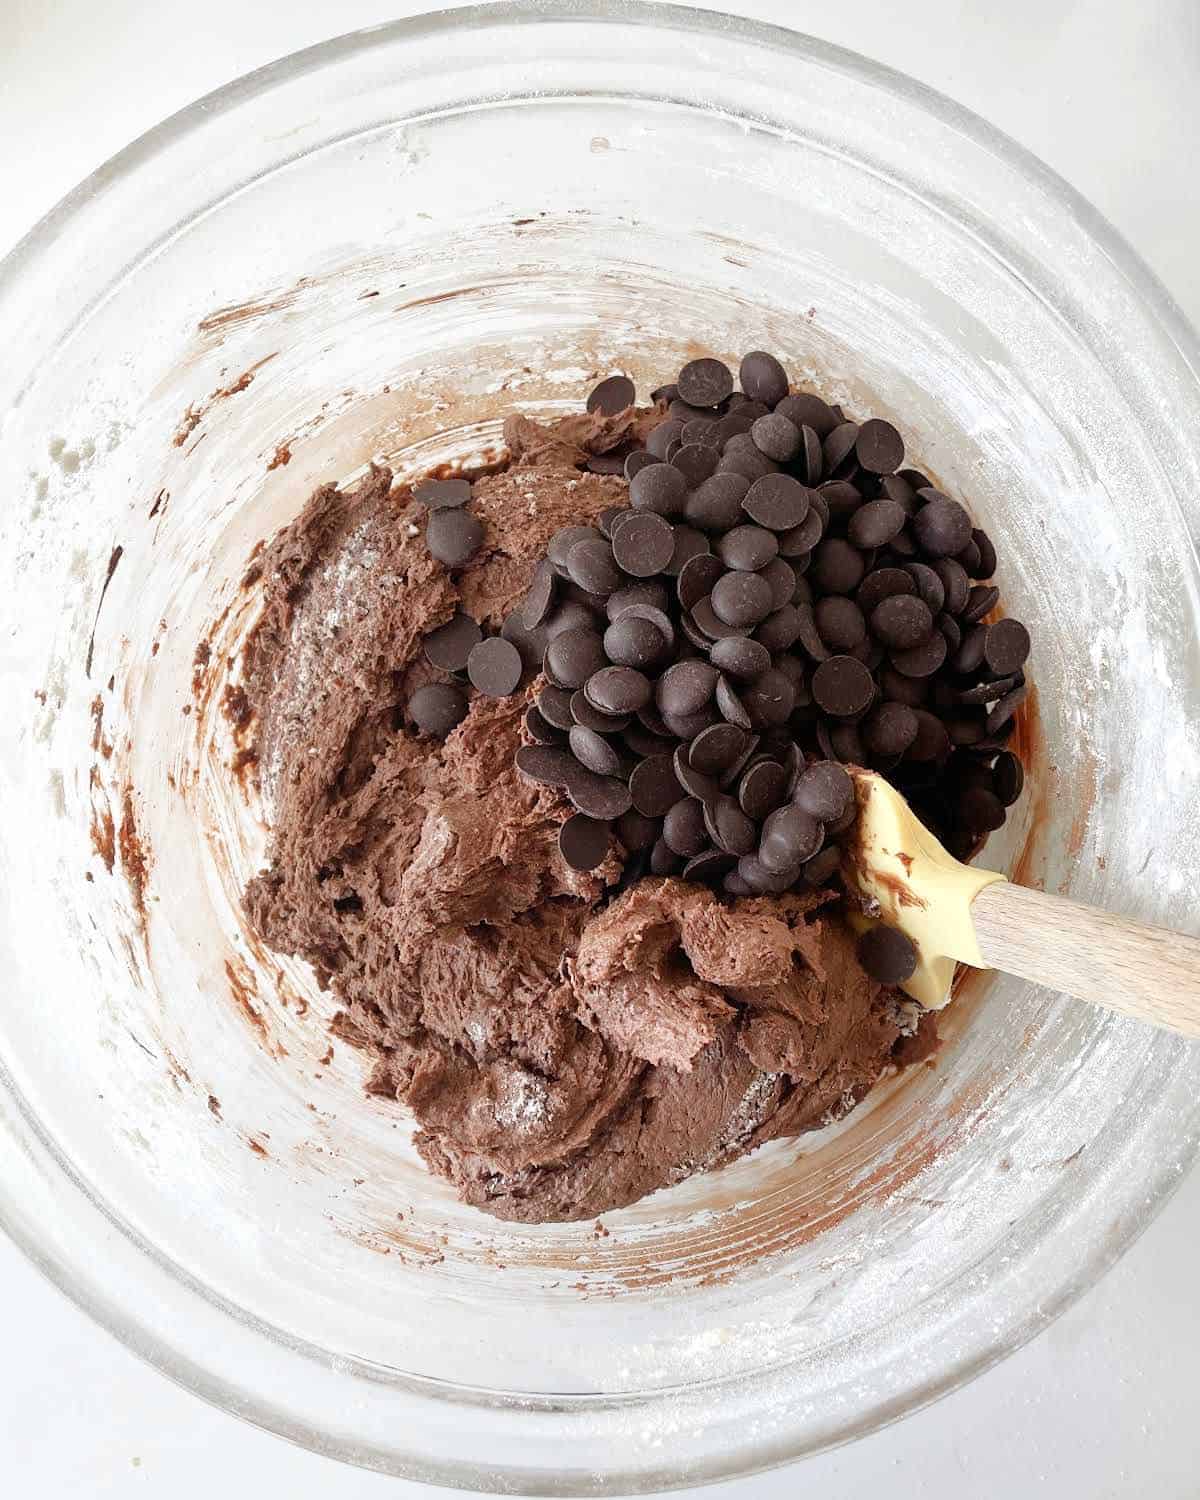 Chocolate chips added to chocolate cookie batter in a glass bowl with a spatula. White marble surface.